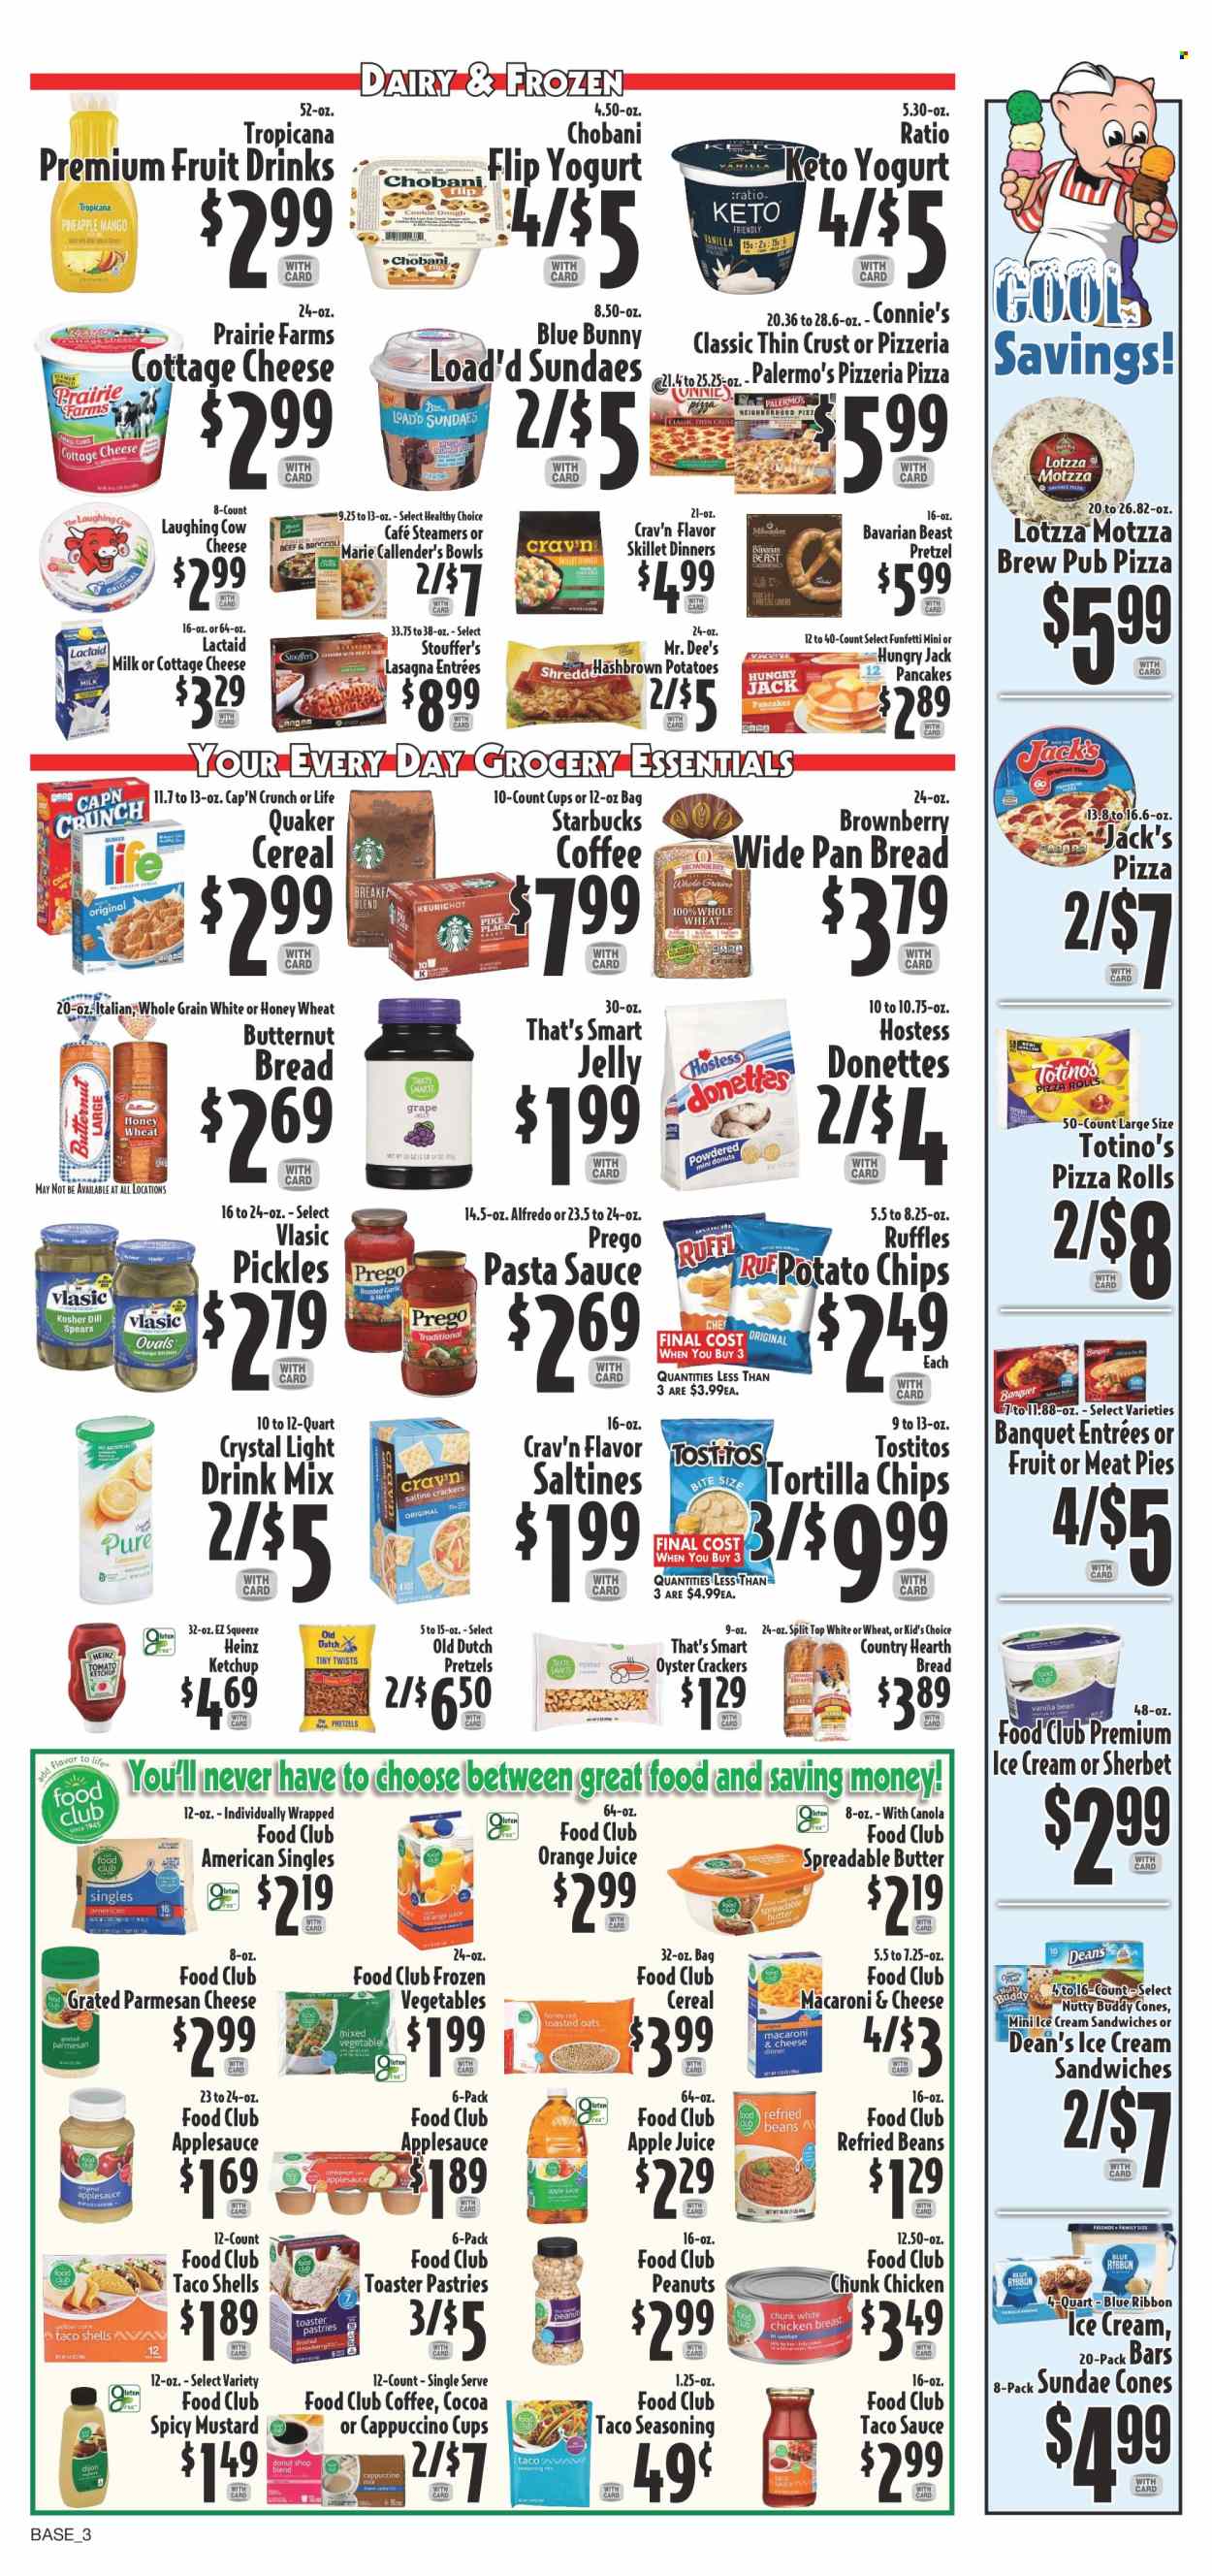 thumbnail - Piggly Wiggly Flyer - 05/31/2023 - 06/06/2023 - Sales products - bread, pretzels, pie, pizza rolls, Blue Ribbon, butternut squash, oysters, macaroni & cheese, pasta sauce, sauce, pancakes, Quaker, lasagna meal, Healthy Choice, Marie Callender's, cottage cheese, Lactaid, The Laughing Cow, Chobani, milk, spreadable butter, ice cream, sherbet, ice cream sandwich, Blue Bunny, frozen vegetables, Stouffer's, jelly, crackers, tortilla chips, potato chips, saltines, Ruffles, Tostitos, cocoa, oyster crackers, refried beans, Heinz, pickles, cereals, Cap'n Crunch, spice, mustard, taco sauce, ketchup, apple sauce, peanuts, apple juice, orange juice, juice, cappuccino, Starbucks, chicken. Page 3.